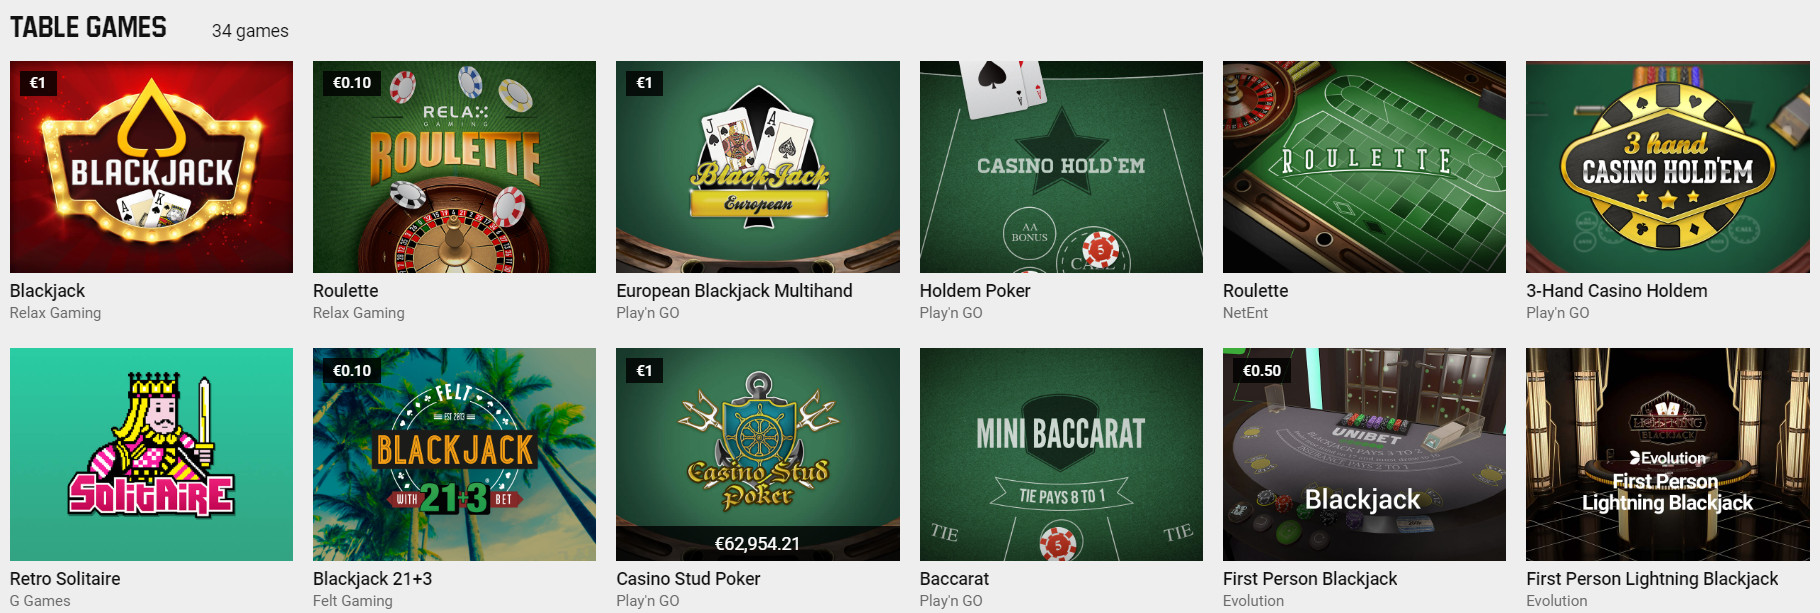 Table Games Section at Unibet Casino